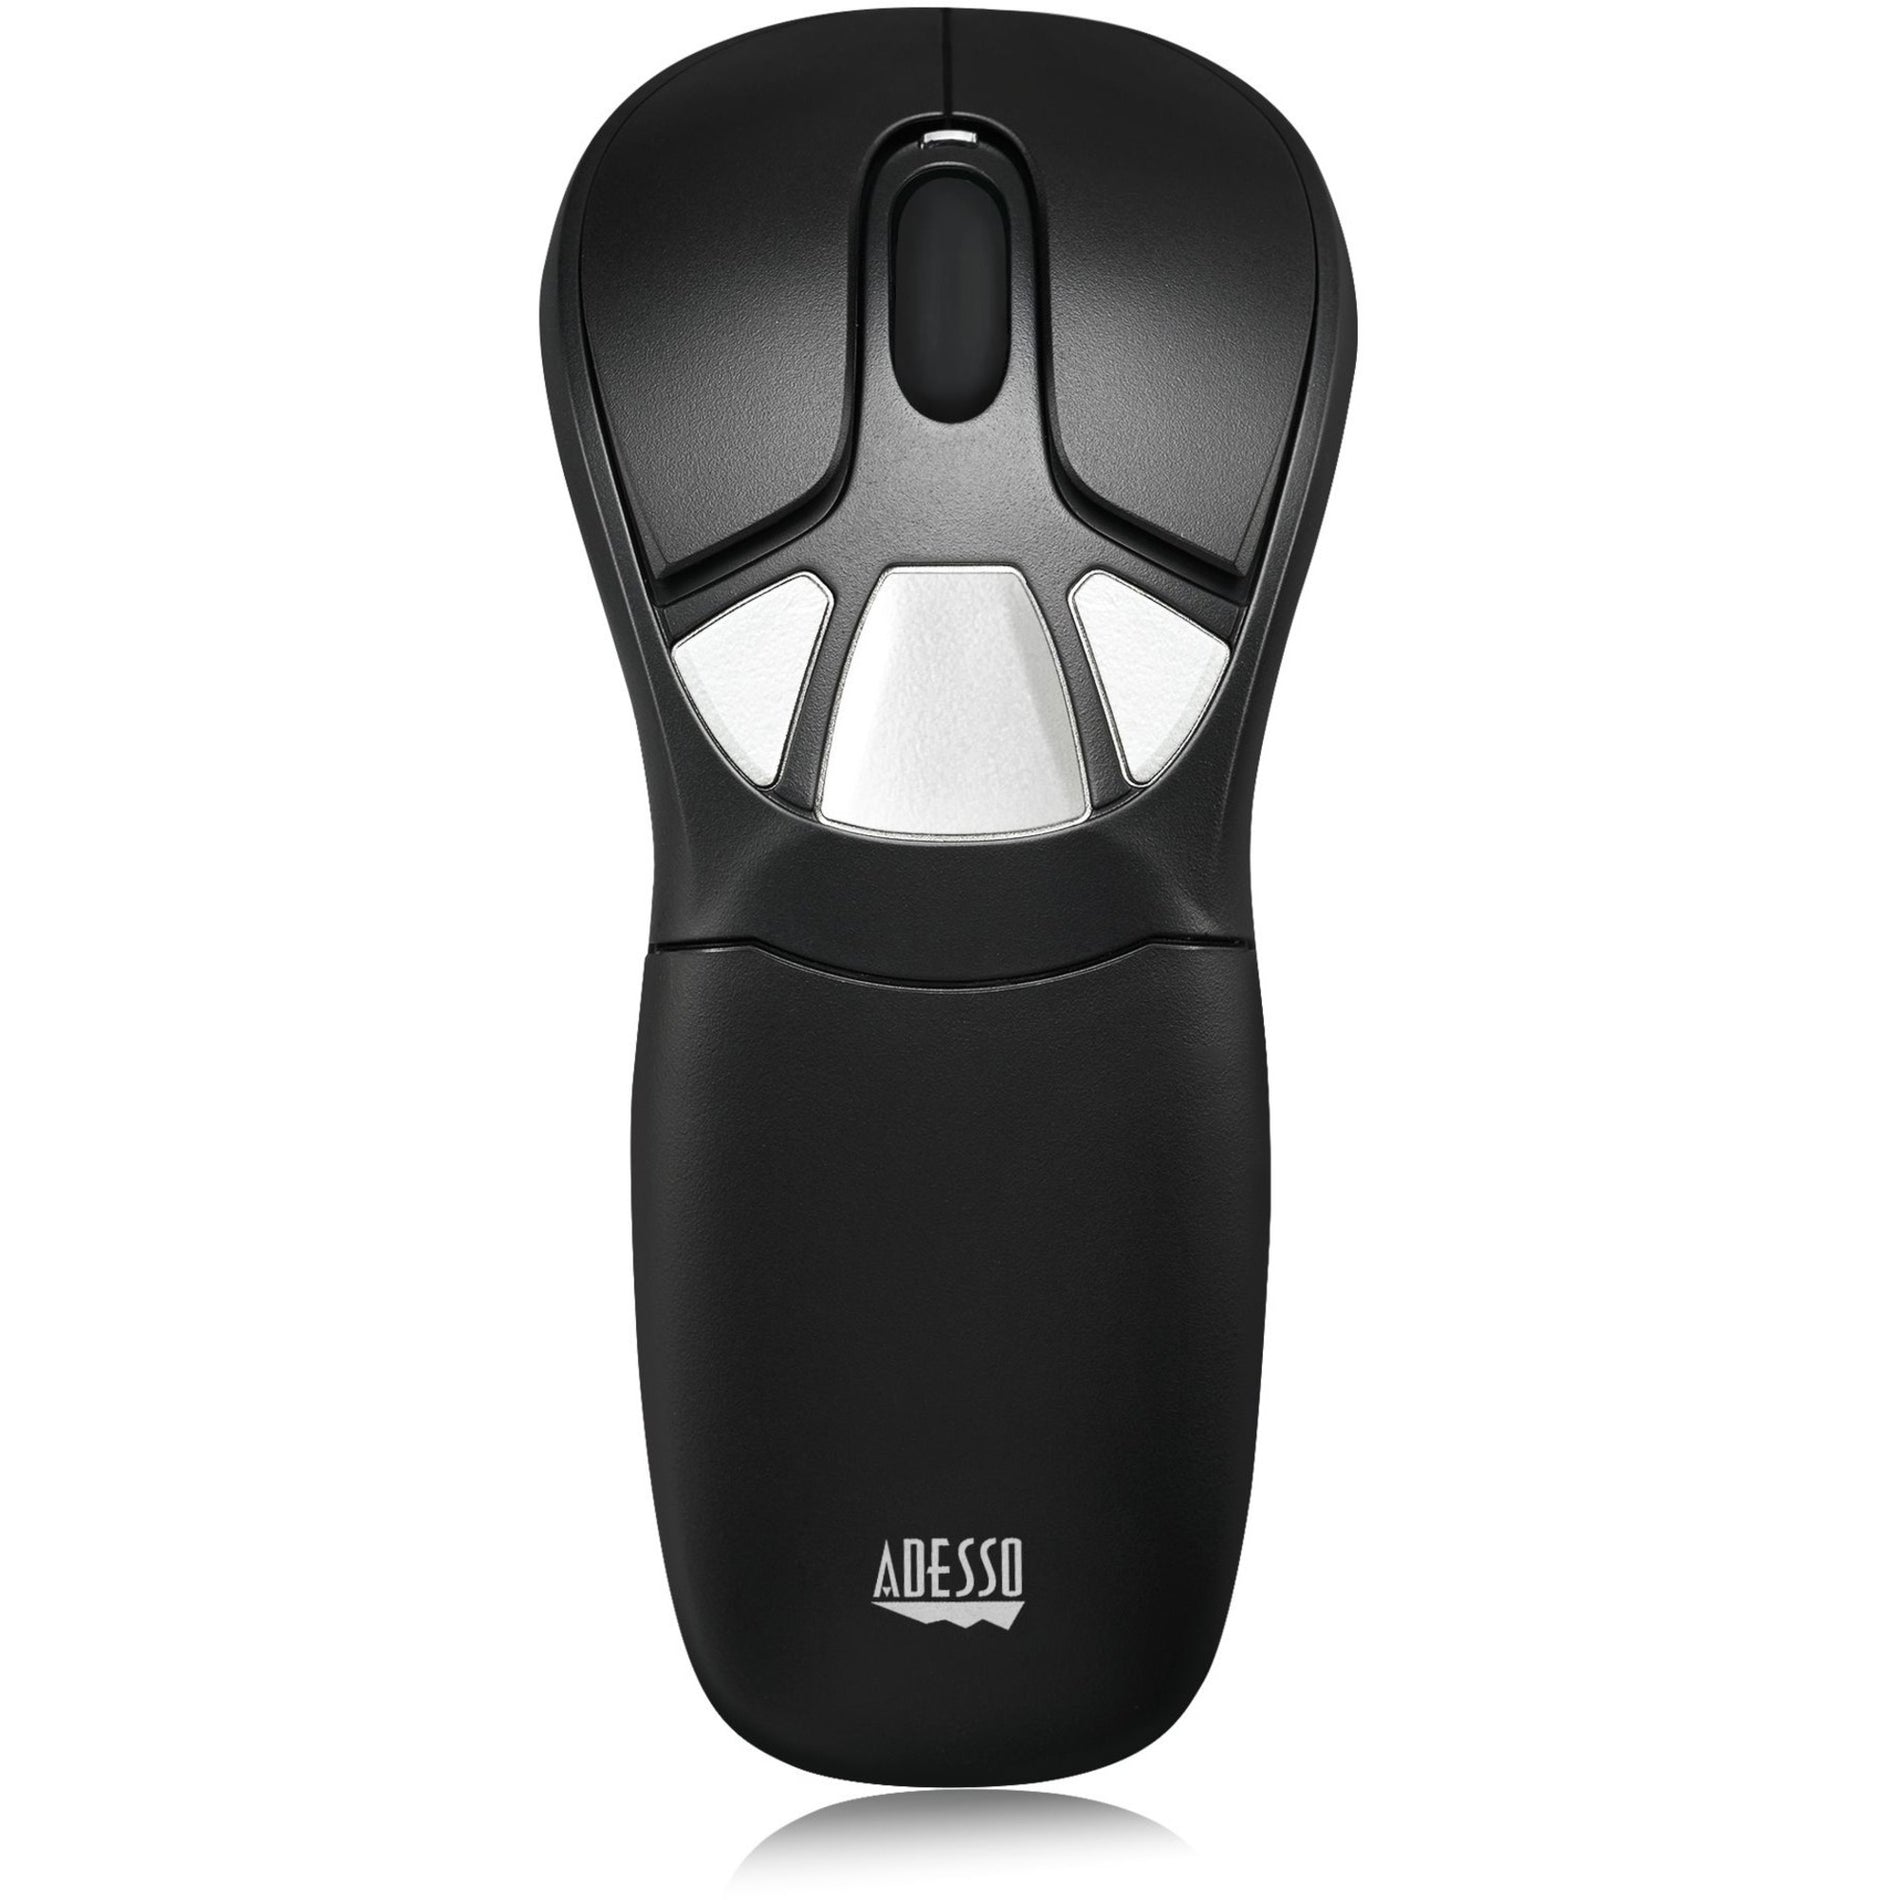 Adesso iMouse P30 Wireless Presenter Mouse, Air Mouse Go Plus, Rechargeable, 9 Buttons